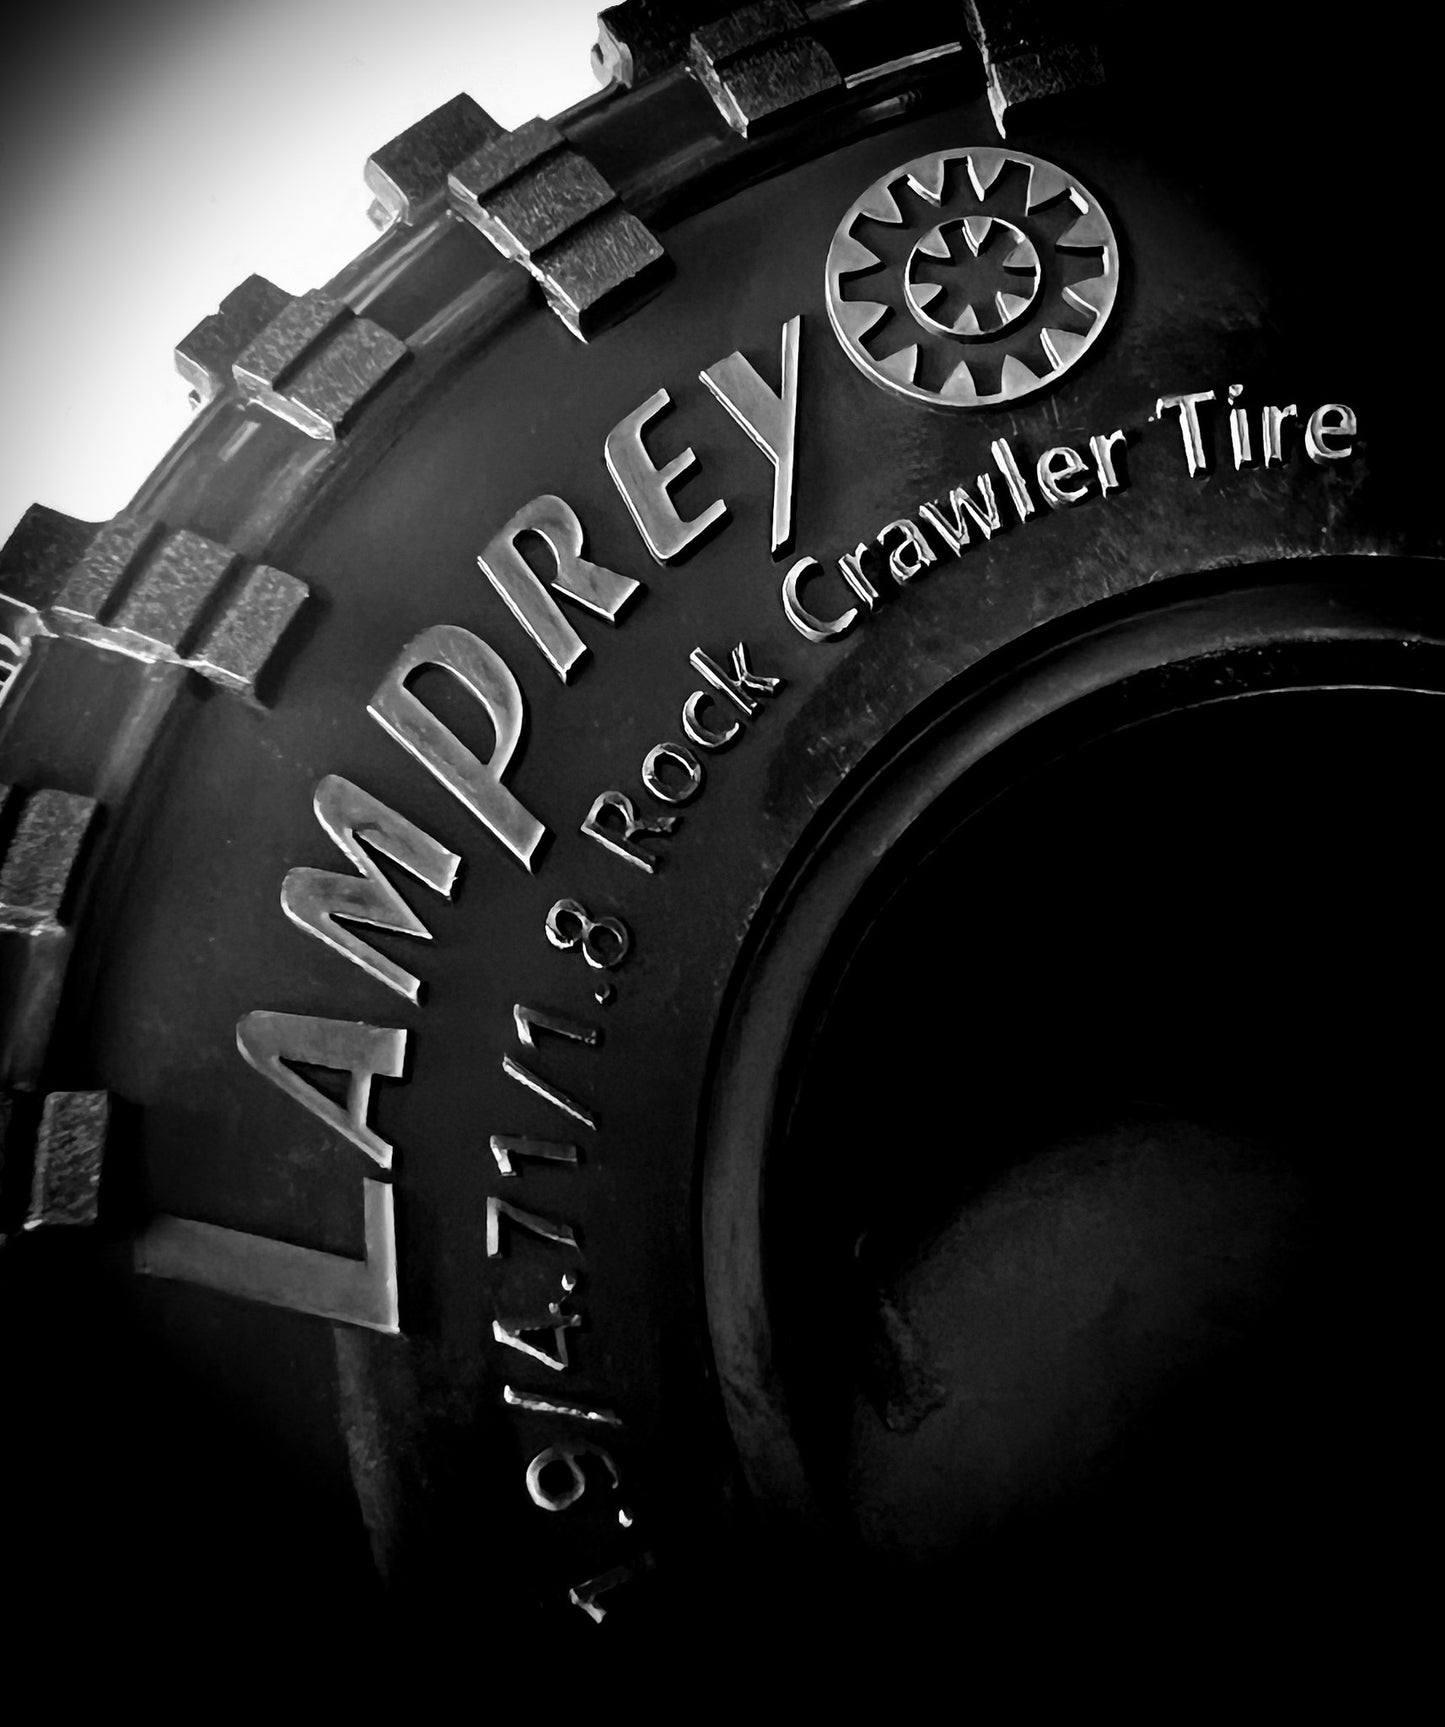 Lamprey 1.9 4.71 - Class 2 Competition tire x4